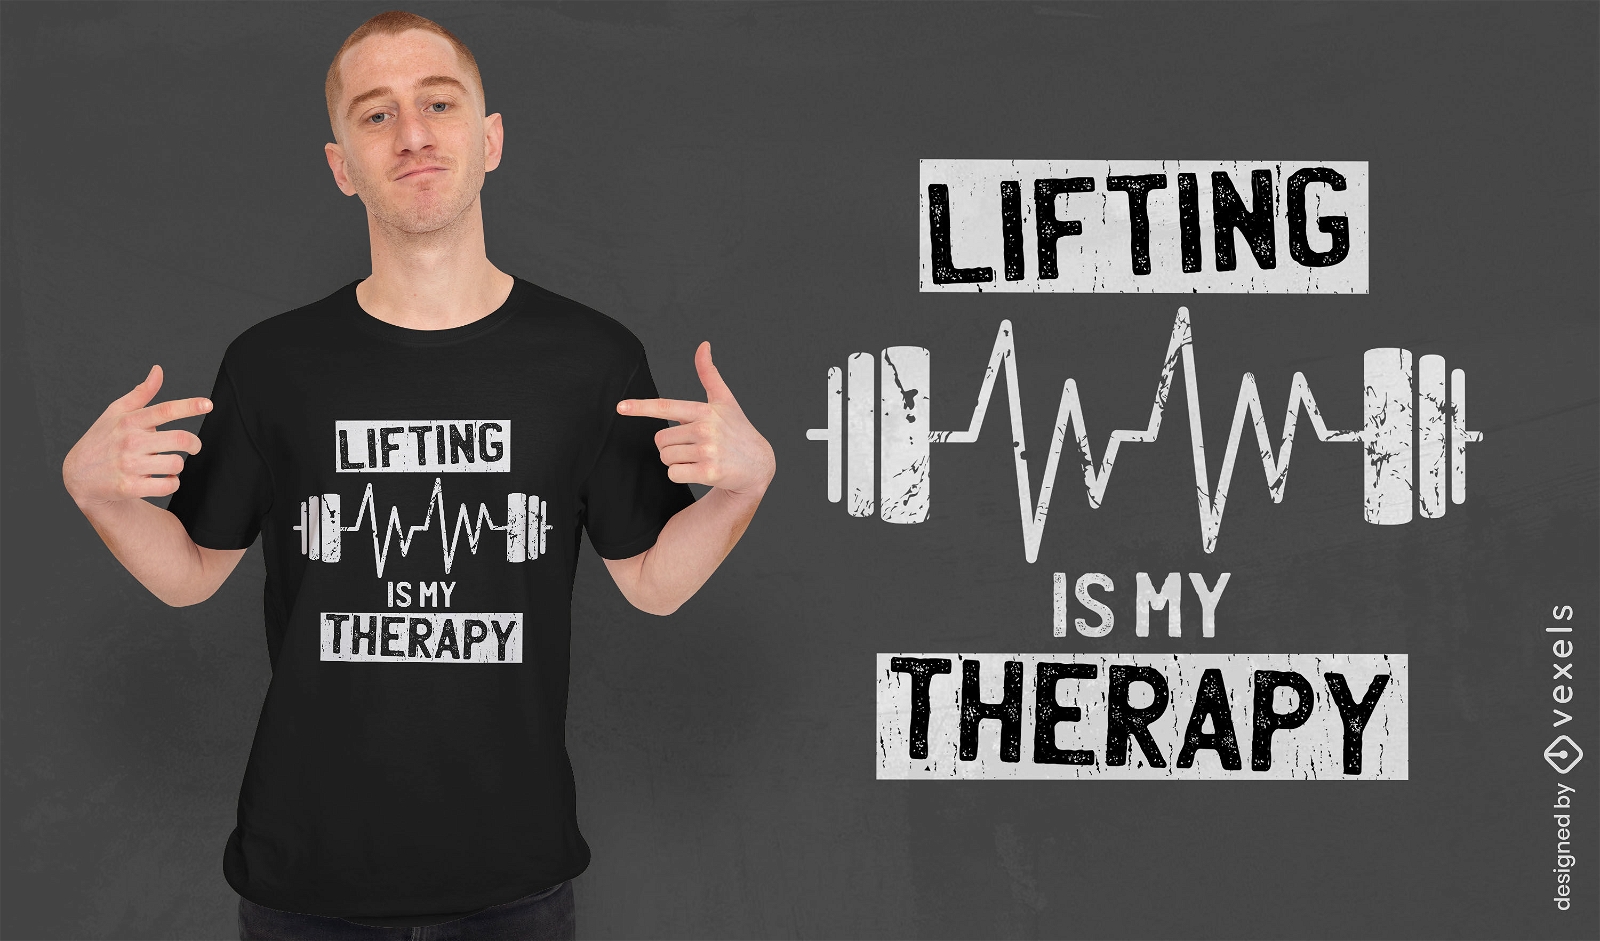 https://images.vexels.com/content/294642/preview/weightlifting-therapy-t-shirt-design-da2599.png